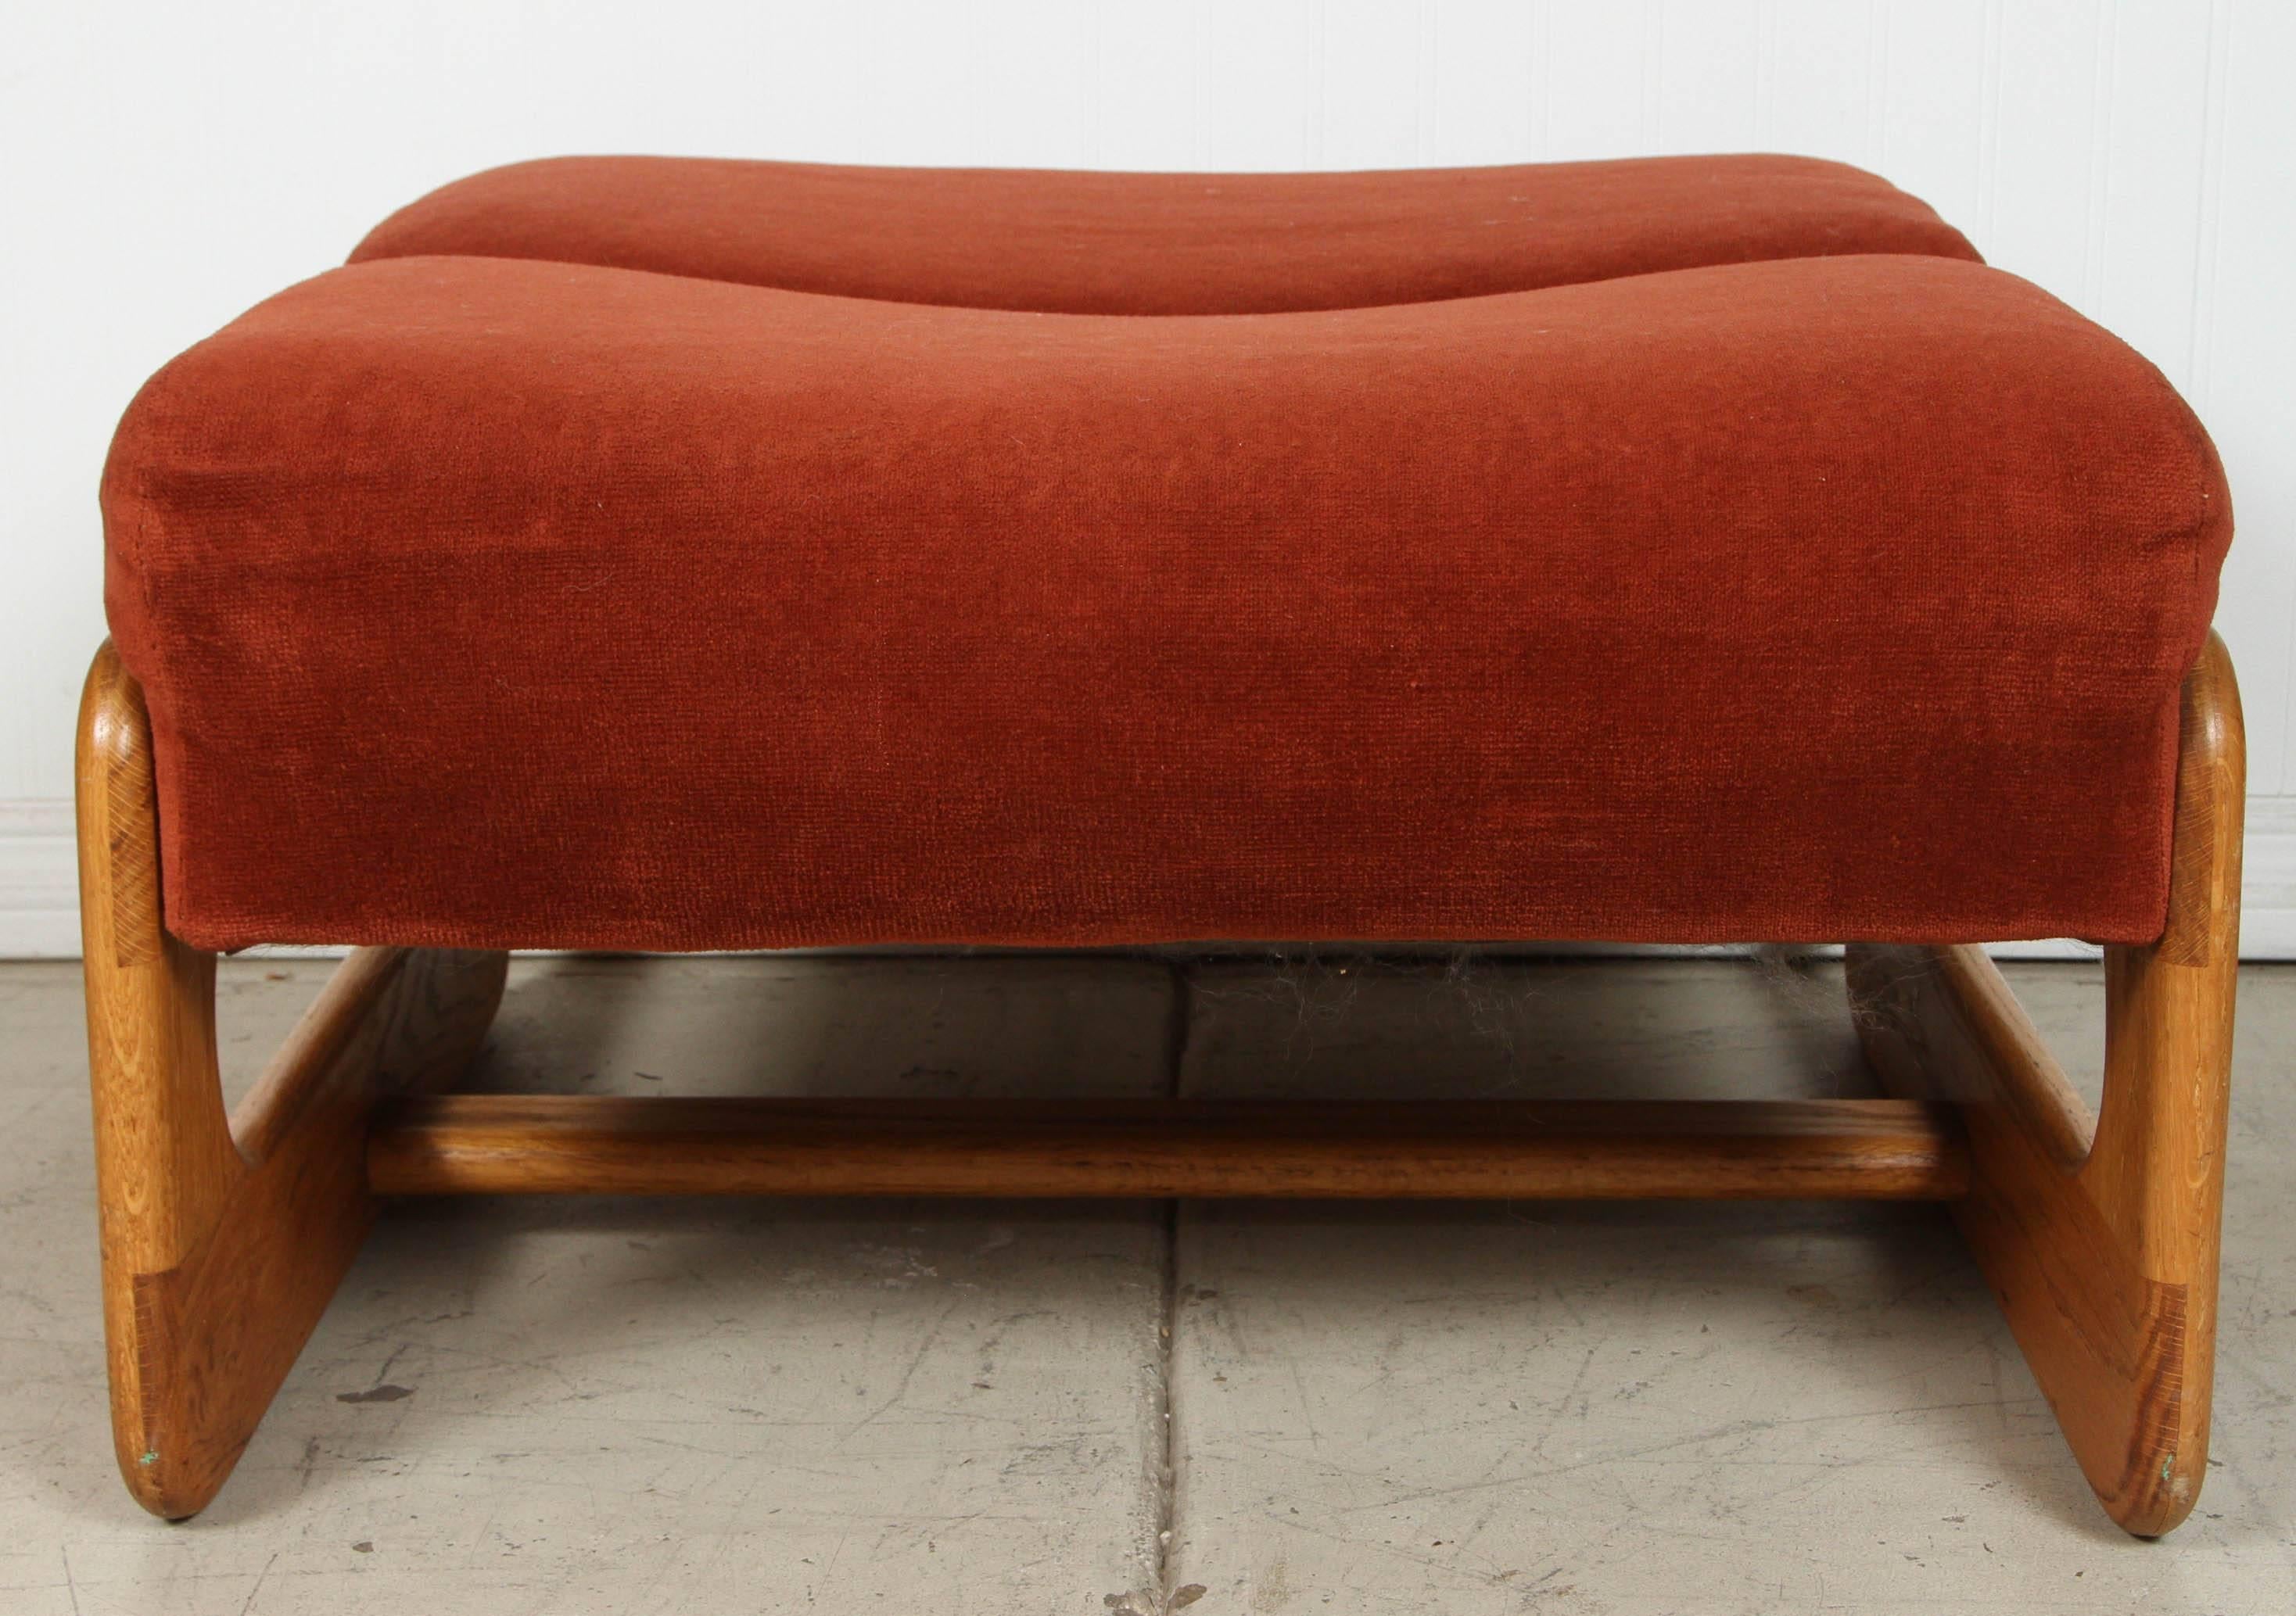 Lounge chair and ottoman by Lou Hodges in oak and suede. 

Ottoman measures : 14.5” H x 25.5” W x 25” D